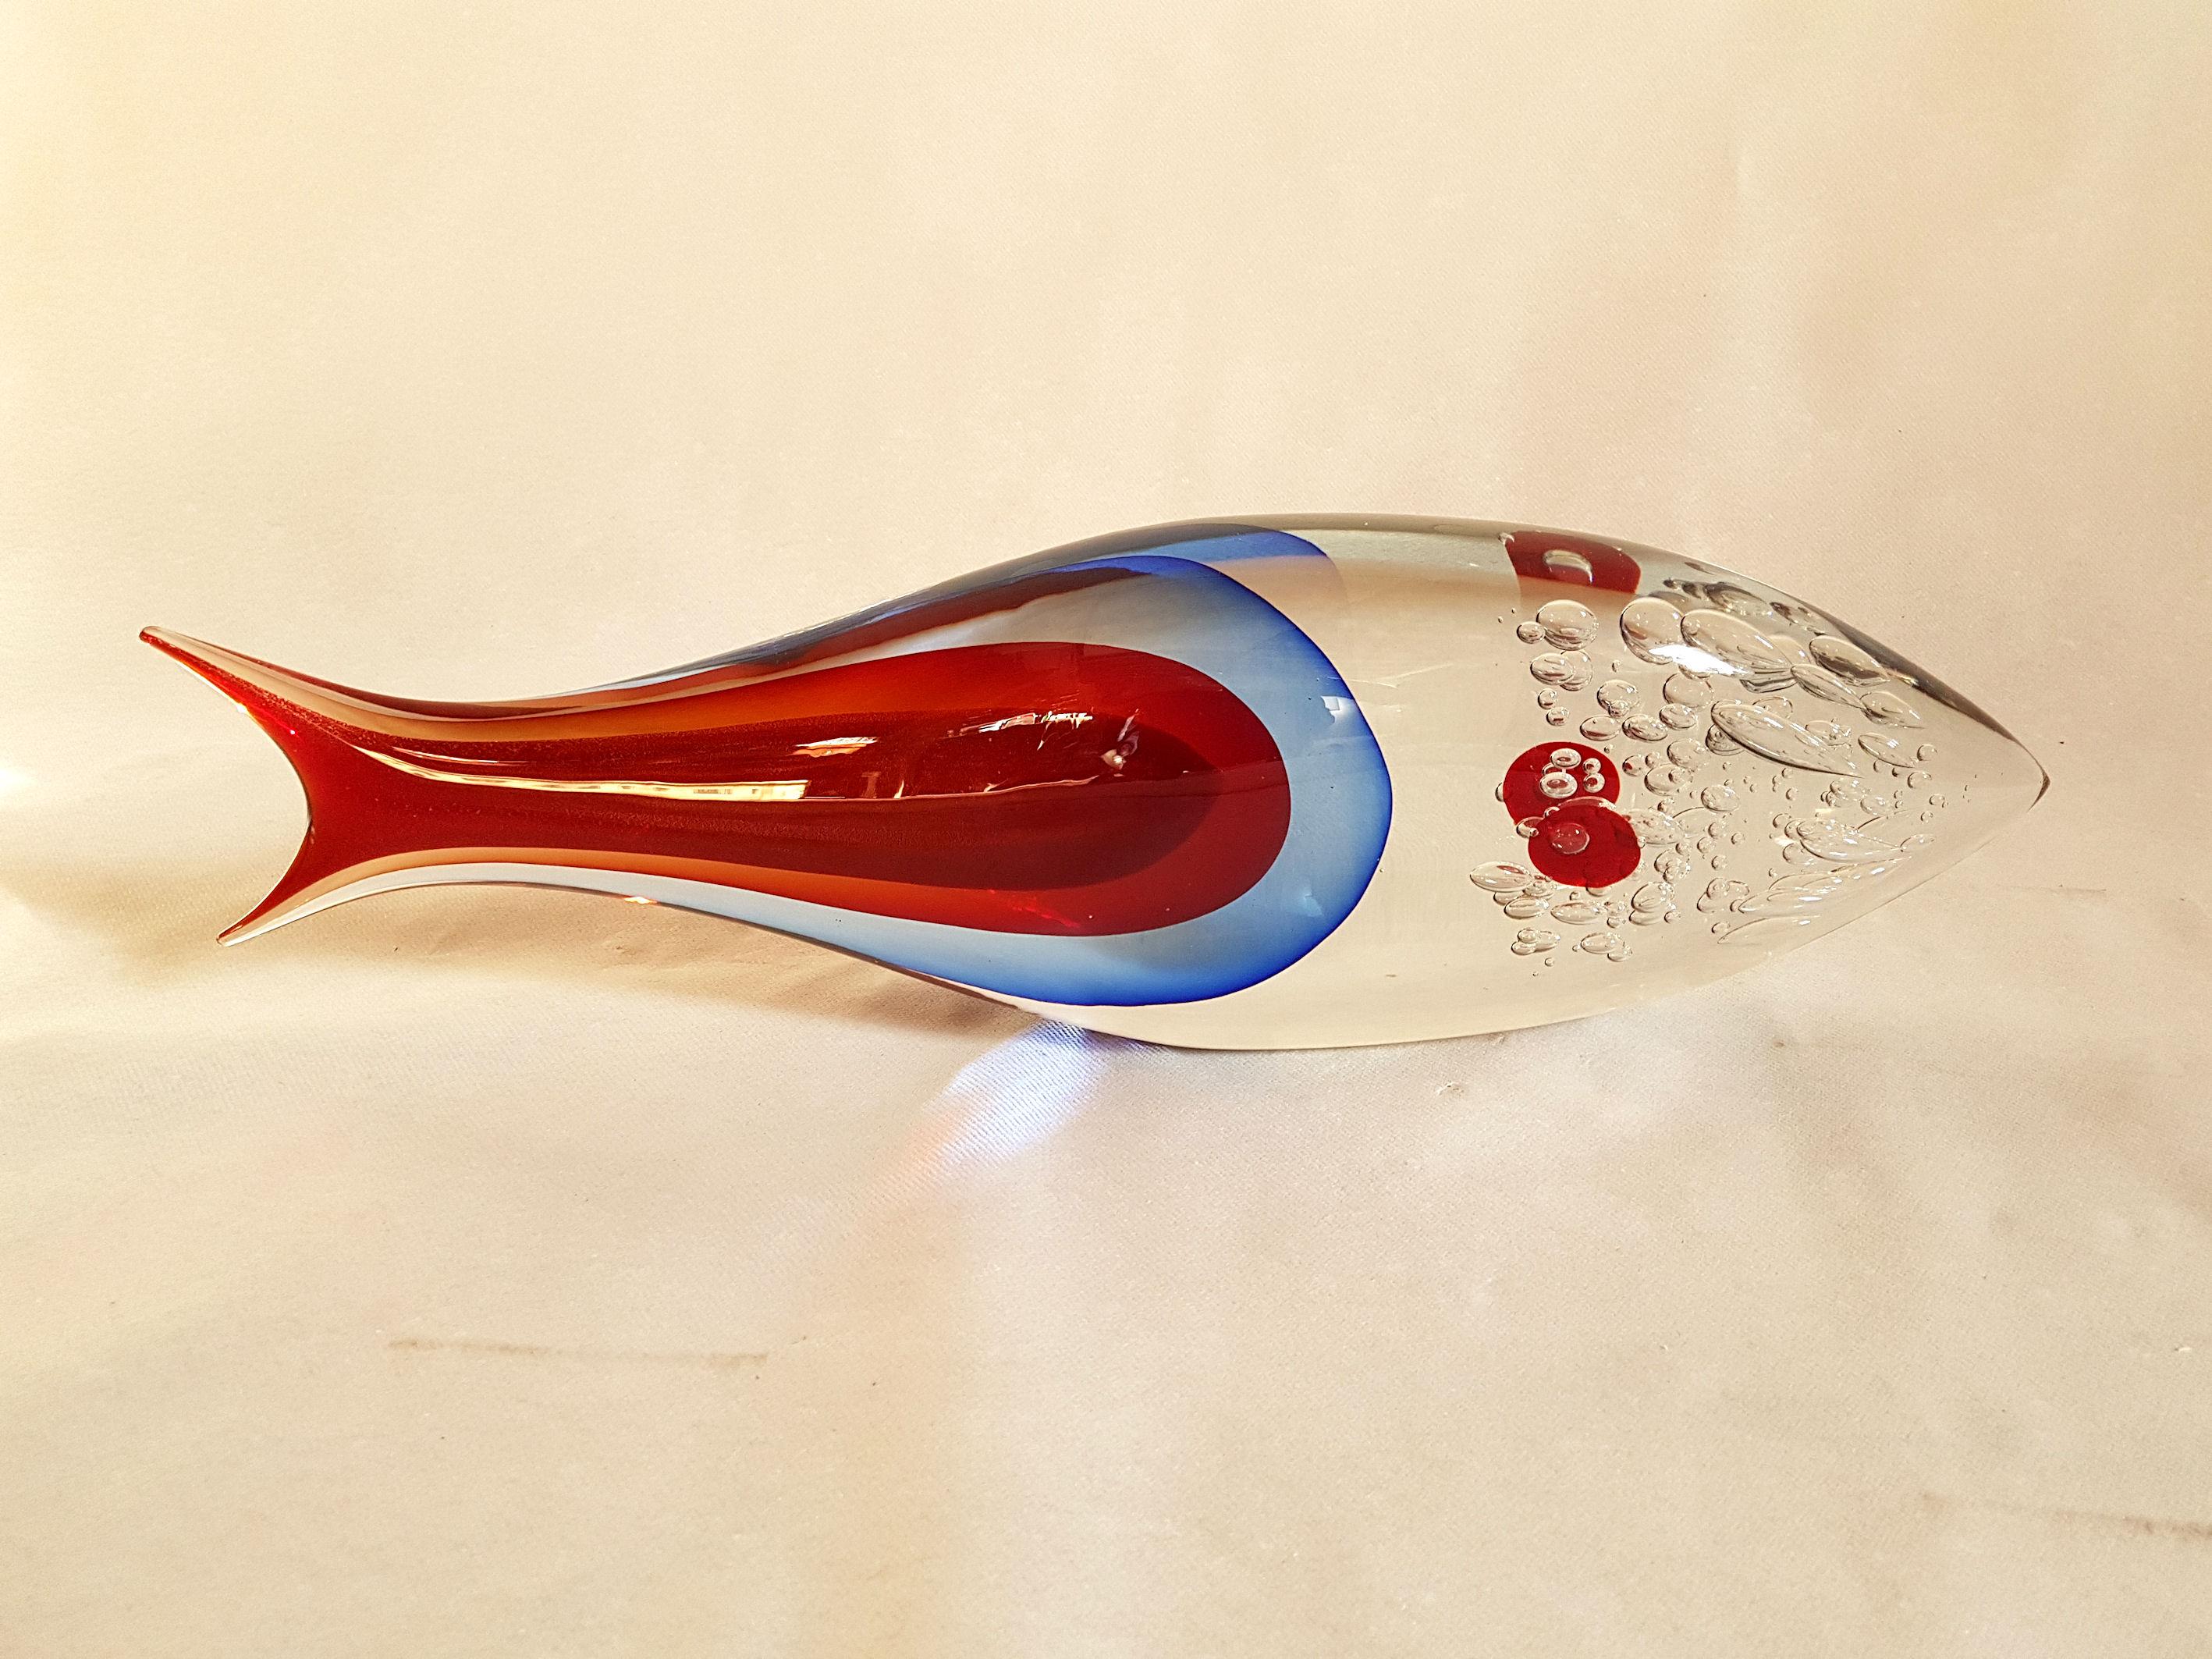 Large size fish sculpture, made in Sommerso Murano glass, by Flavio Poli, circa 1970s, Italy.
Blue and red hues and clear glass, with air bubbles inside.
Hand blown Murano work.
Excellent condition.